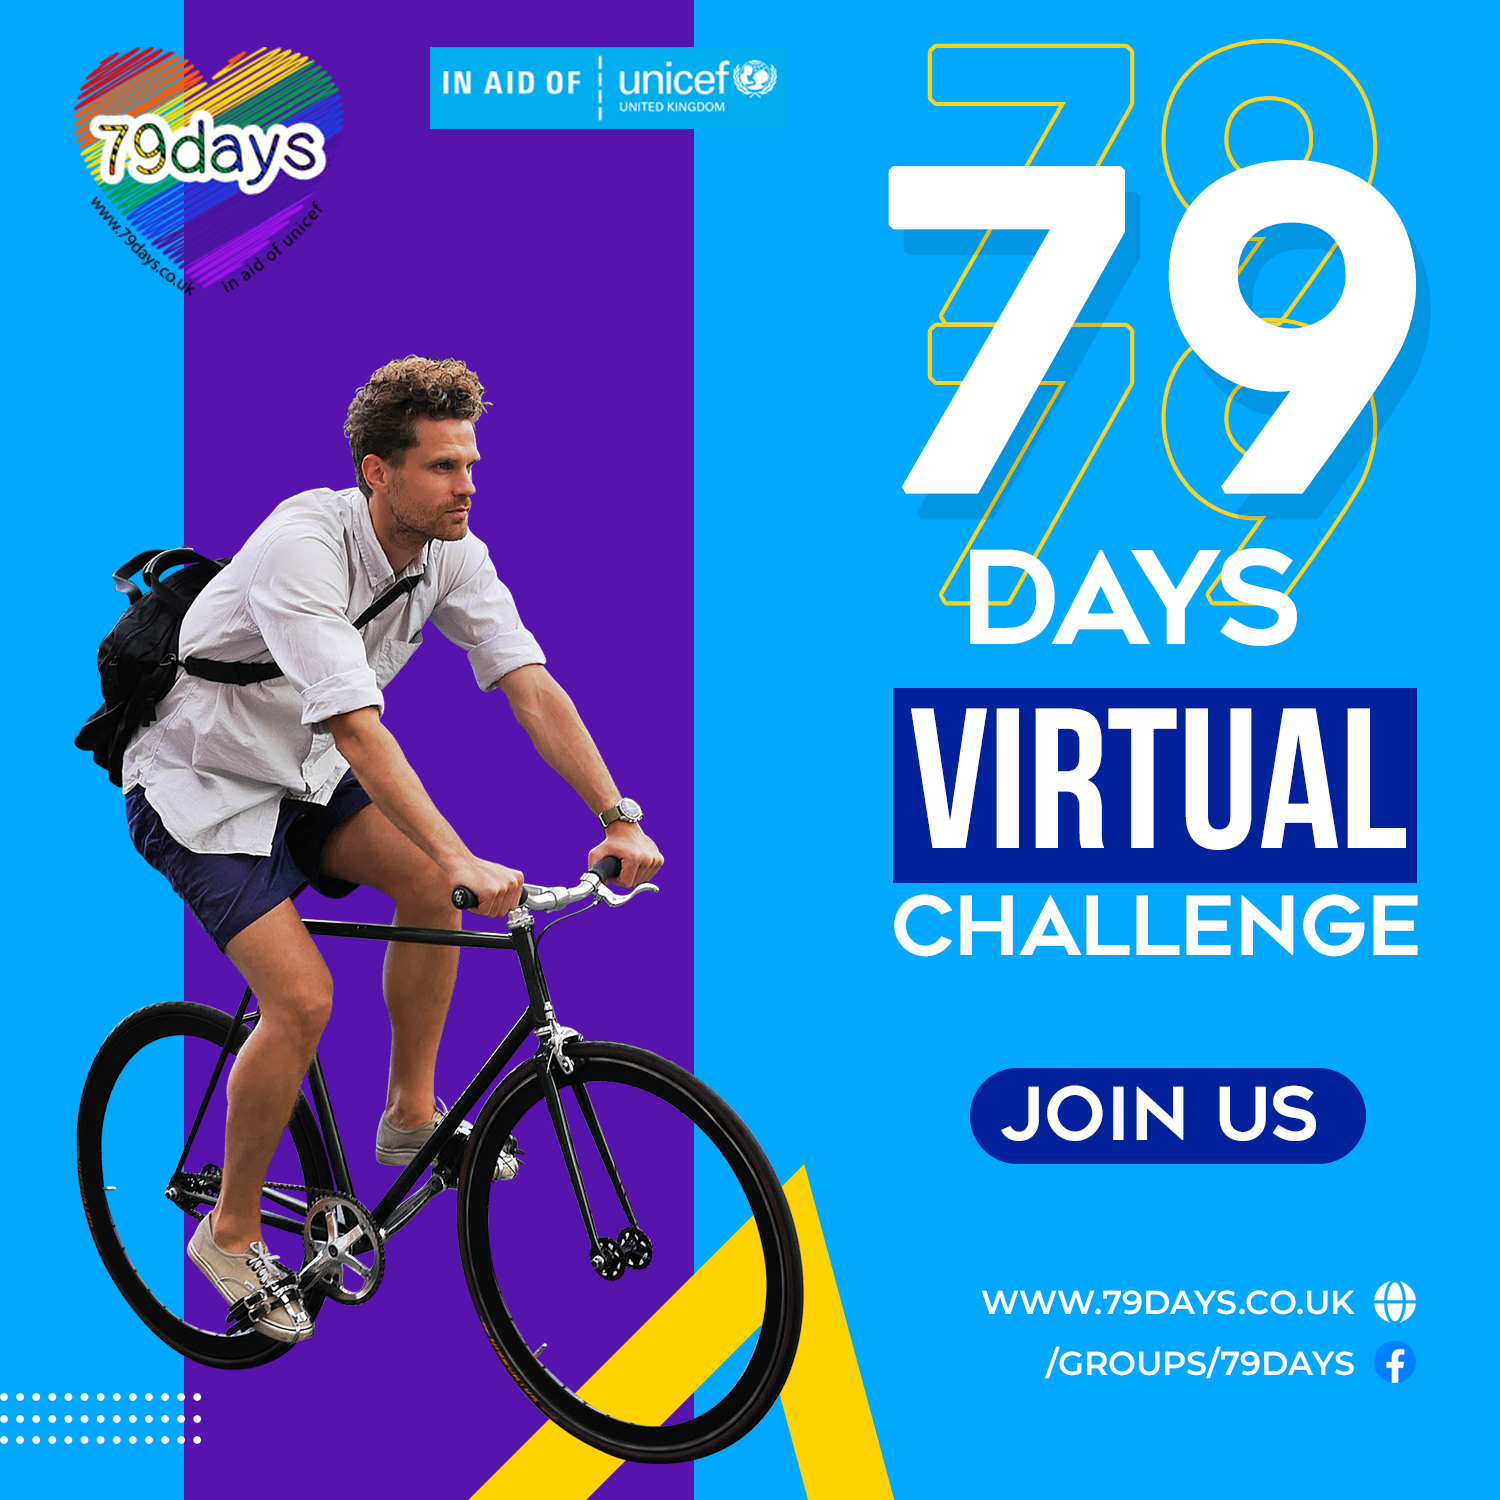 Cycle around the world in 79 days